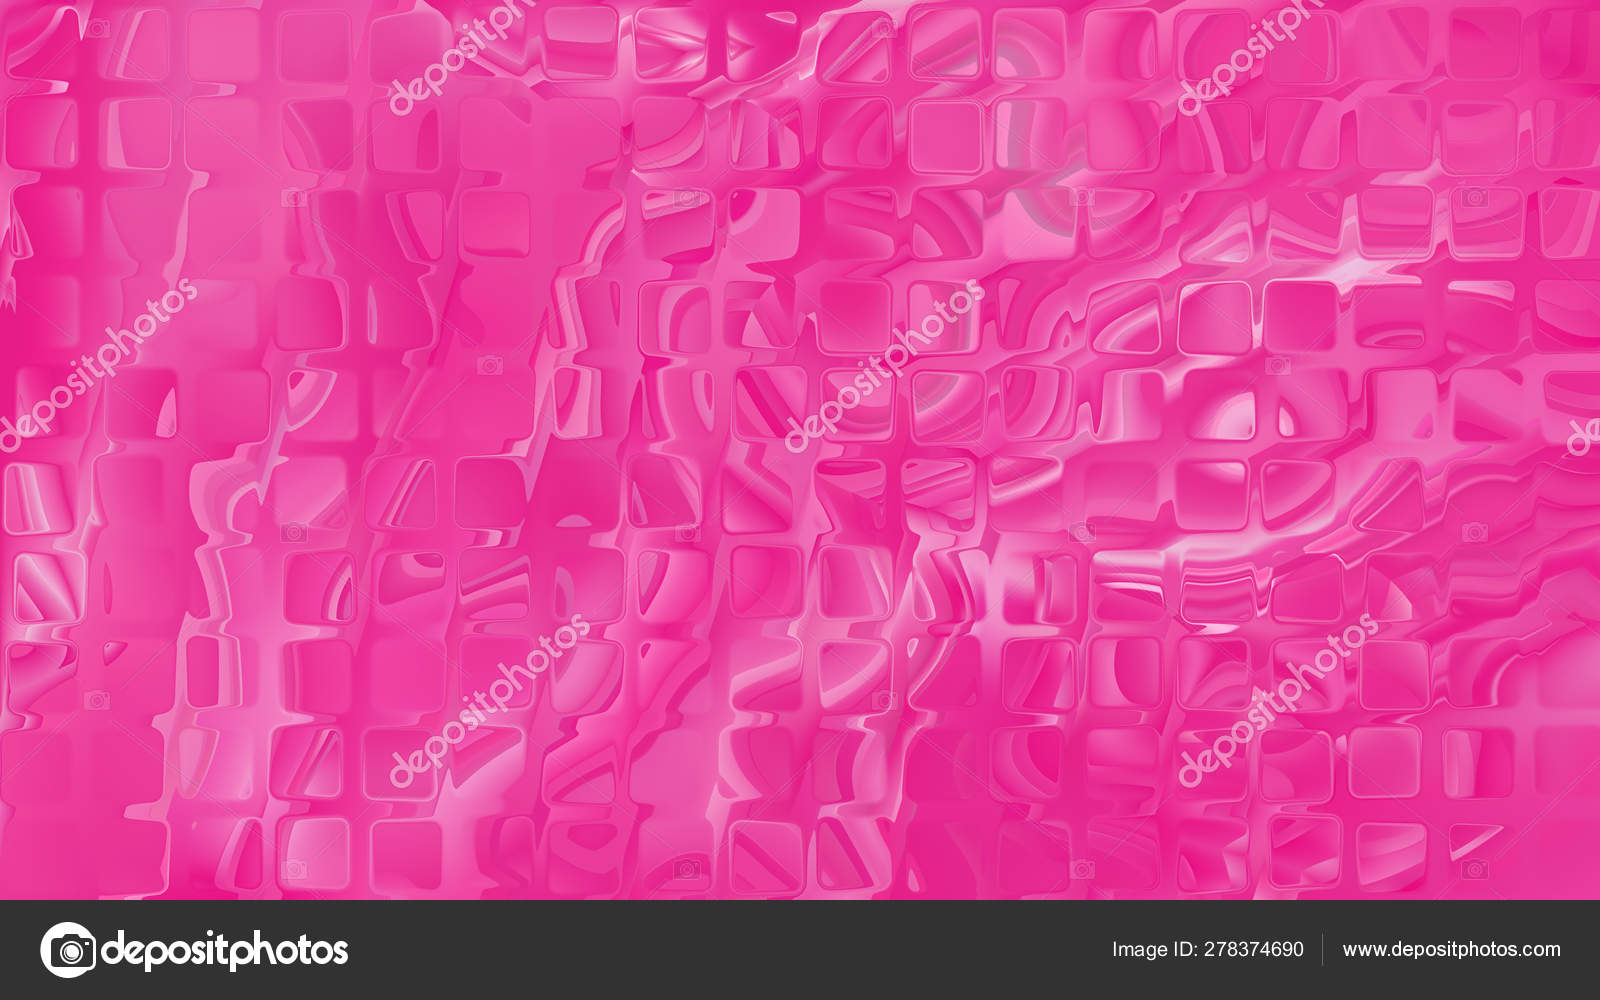 Abstract Hot Pink Texture Background Beautiful Elegant Illustration Graphic  Art Stock Photo by ©StockGraphicDesigns 278374690